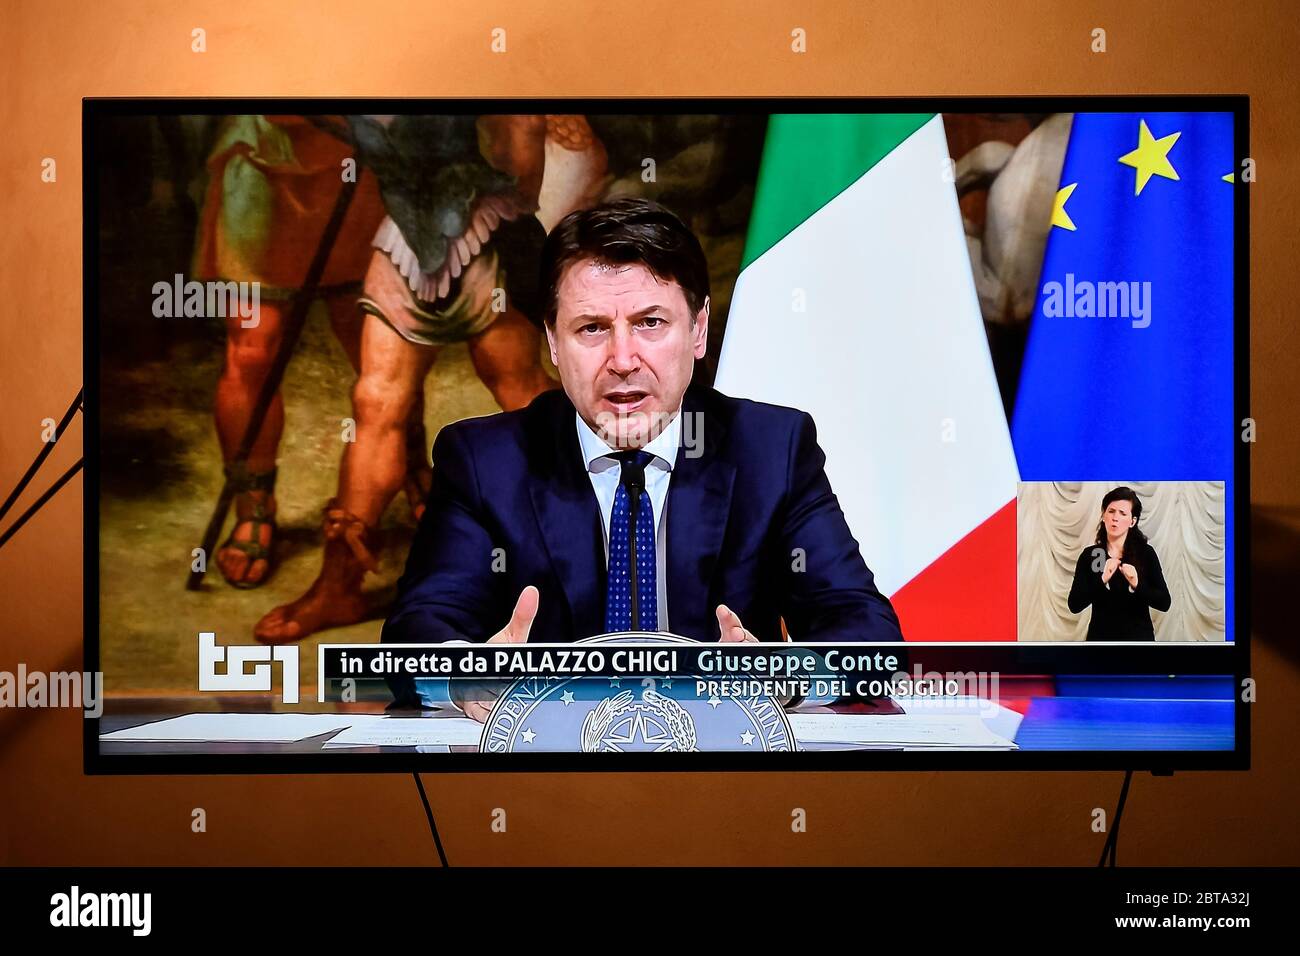 Turin, Italy - 01 April, 2020: Italian Prime Minister Giuseppe Conte, broadcasted on television by channel RAI 1, announces to Italian people the extension of the restrictions until April 13th to contain crisis caused by the coronavirus. The Italian government imposed unprecedented restrictions to halt the spread of COVID-19 coronavirus outbreak, among other measures people movements are allowed only for work, for buying essential goods and for health reasons. Credit: Nicolò Campo/Alamy Live News Stock Photo